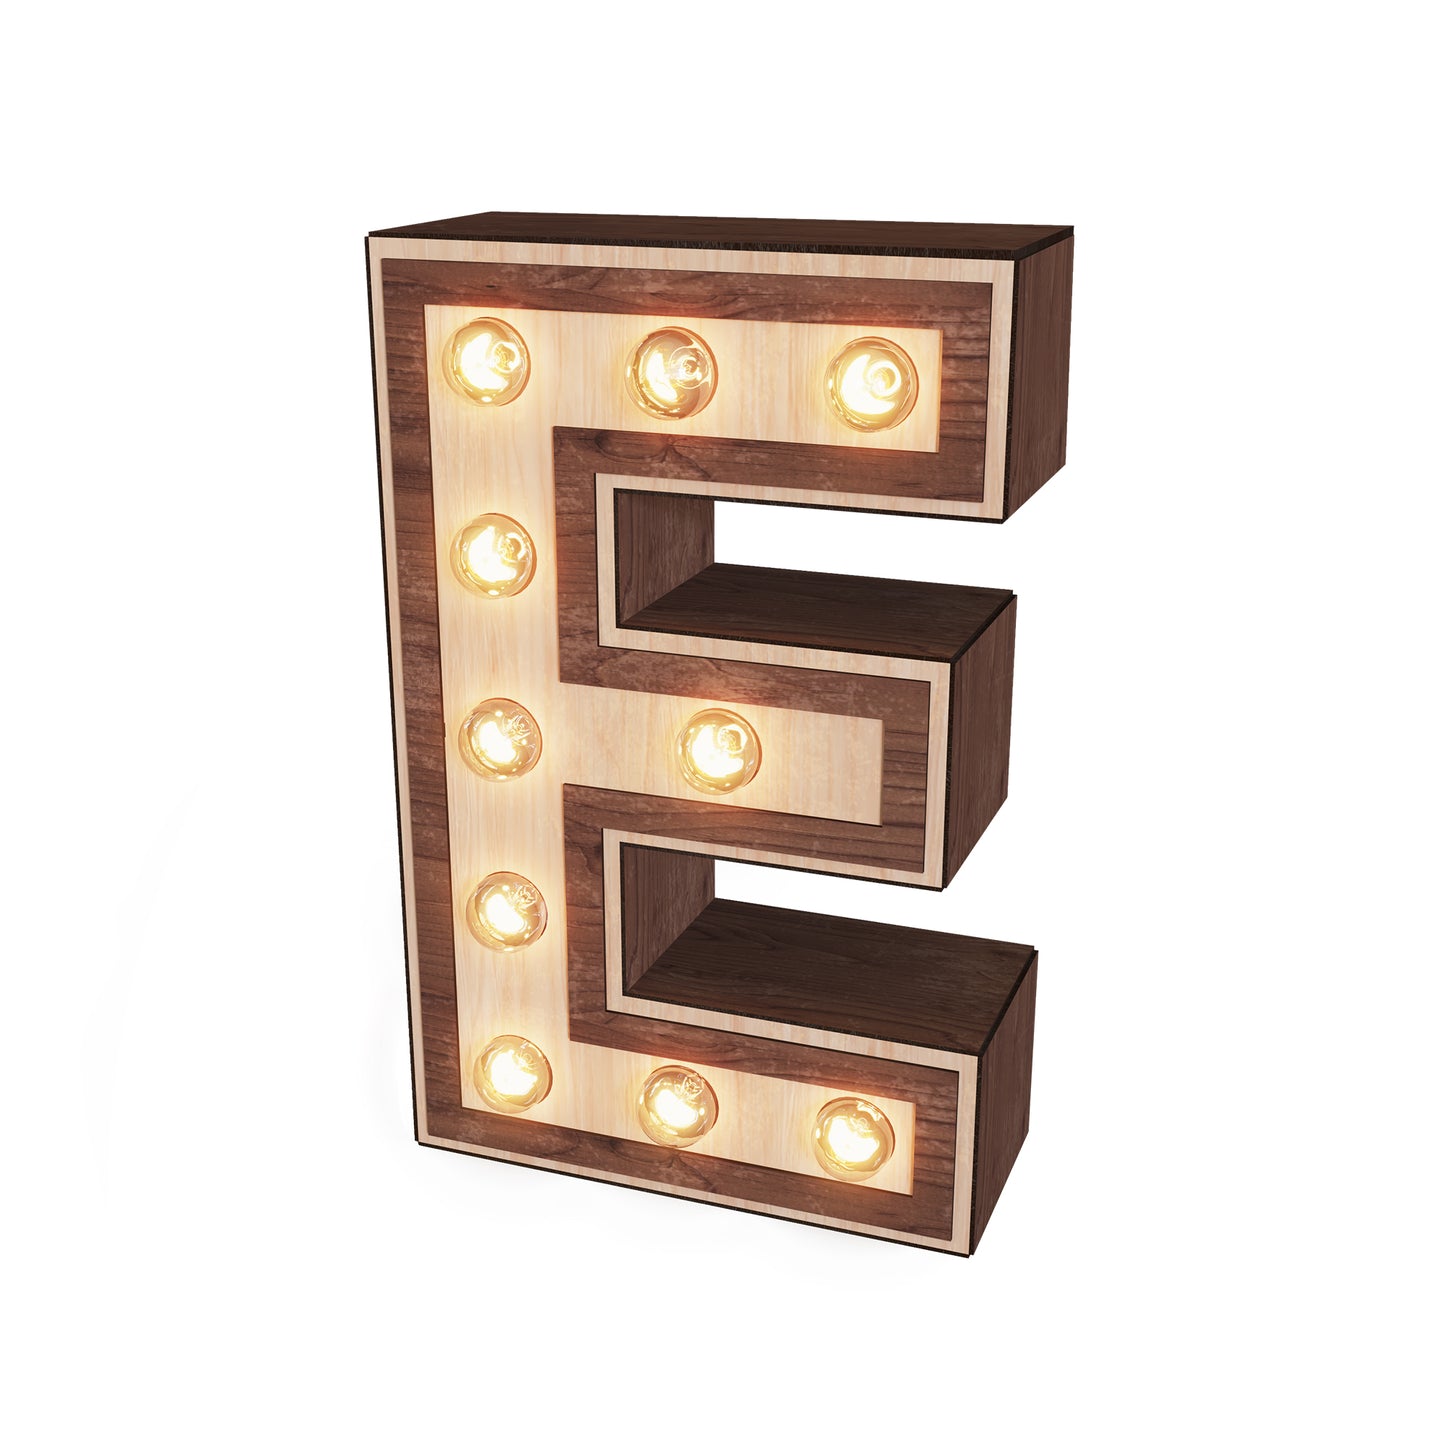 Light-up Marquee Letter Display "E"